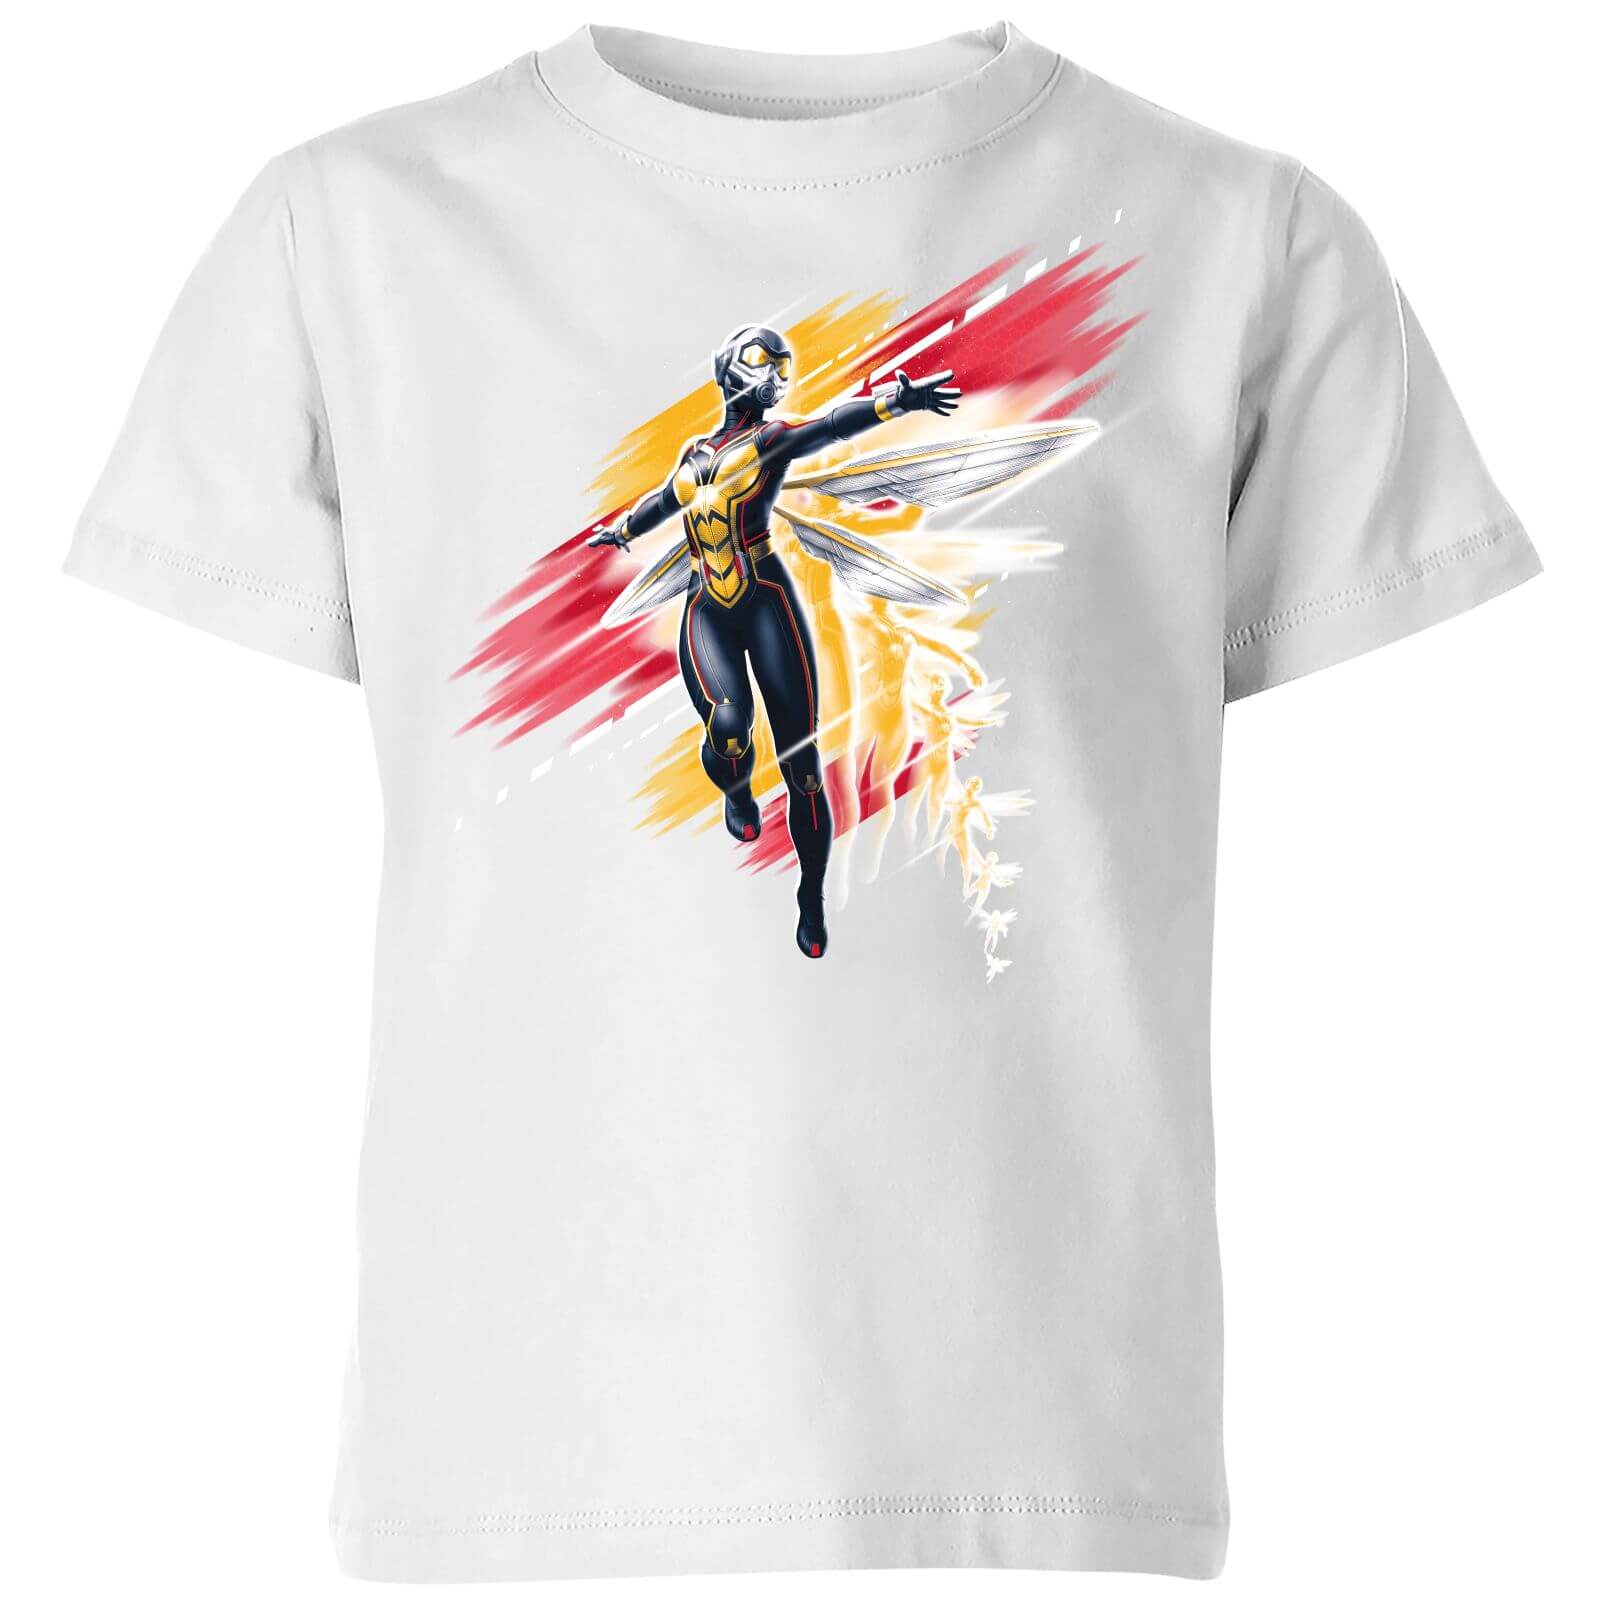 Marvel Ant-Man And The Wasp Brushed Kids' T-Shirt - White - 5-6 Years - White